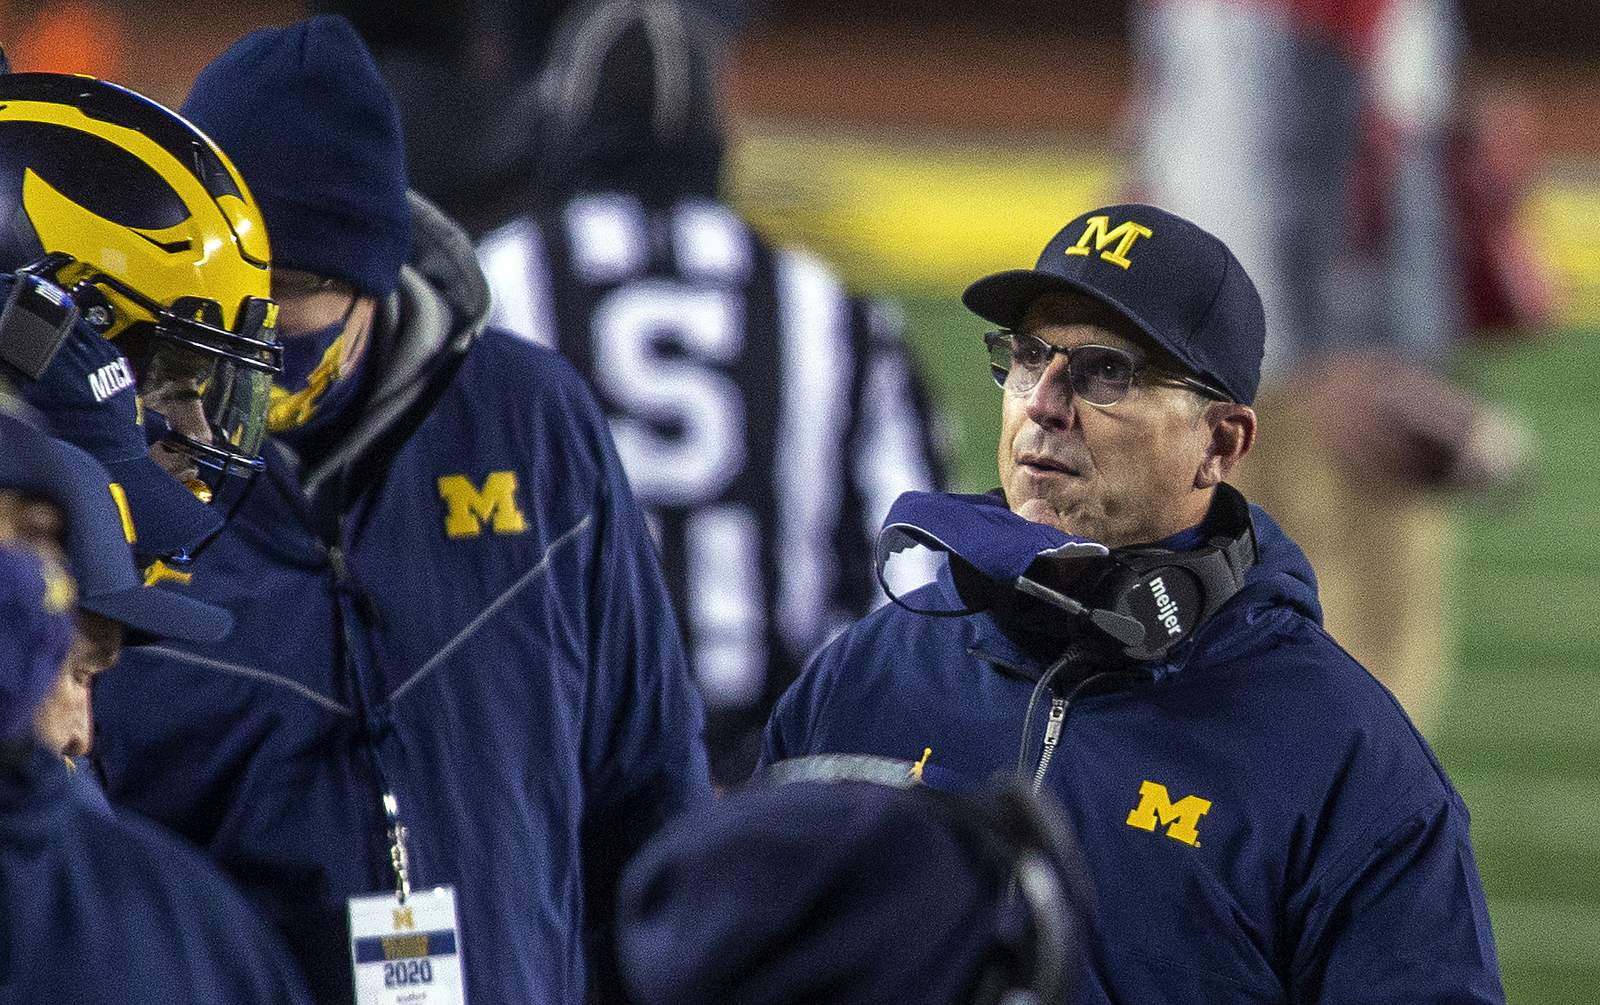 Michigan-Ohio State game canceled over COVID-19 concerns